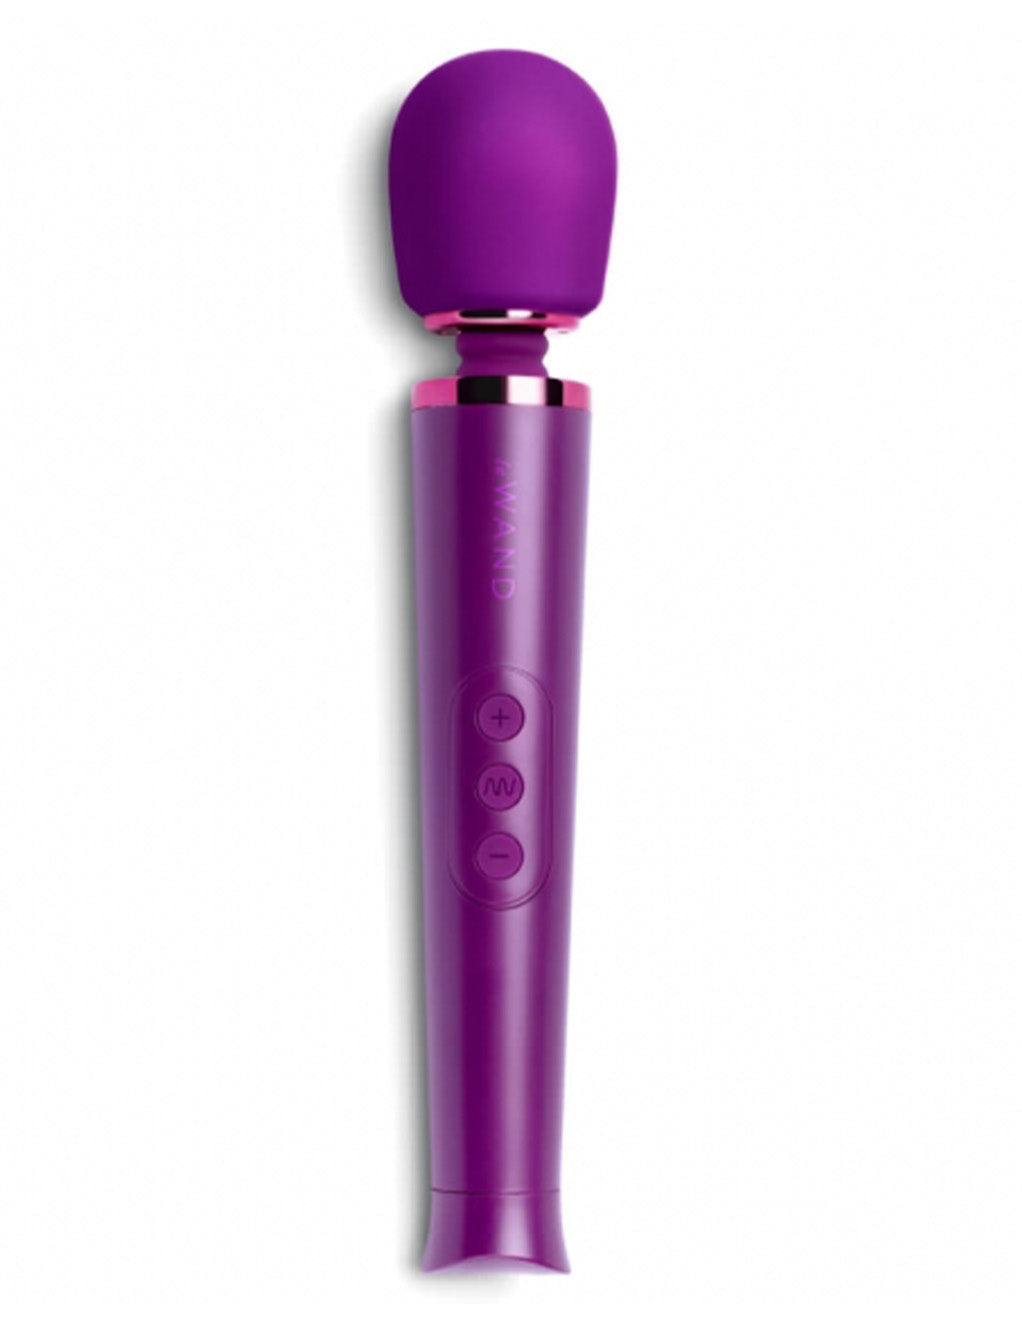 Le Wand Petite Rechargeable Wand Massager- Cherry- Front